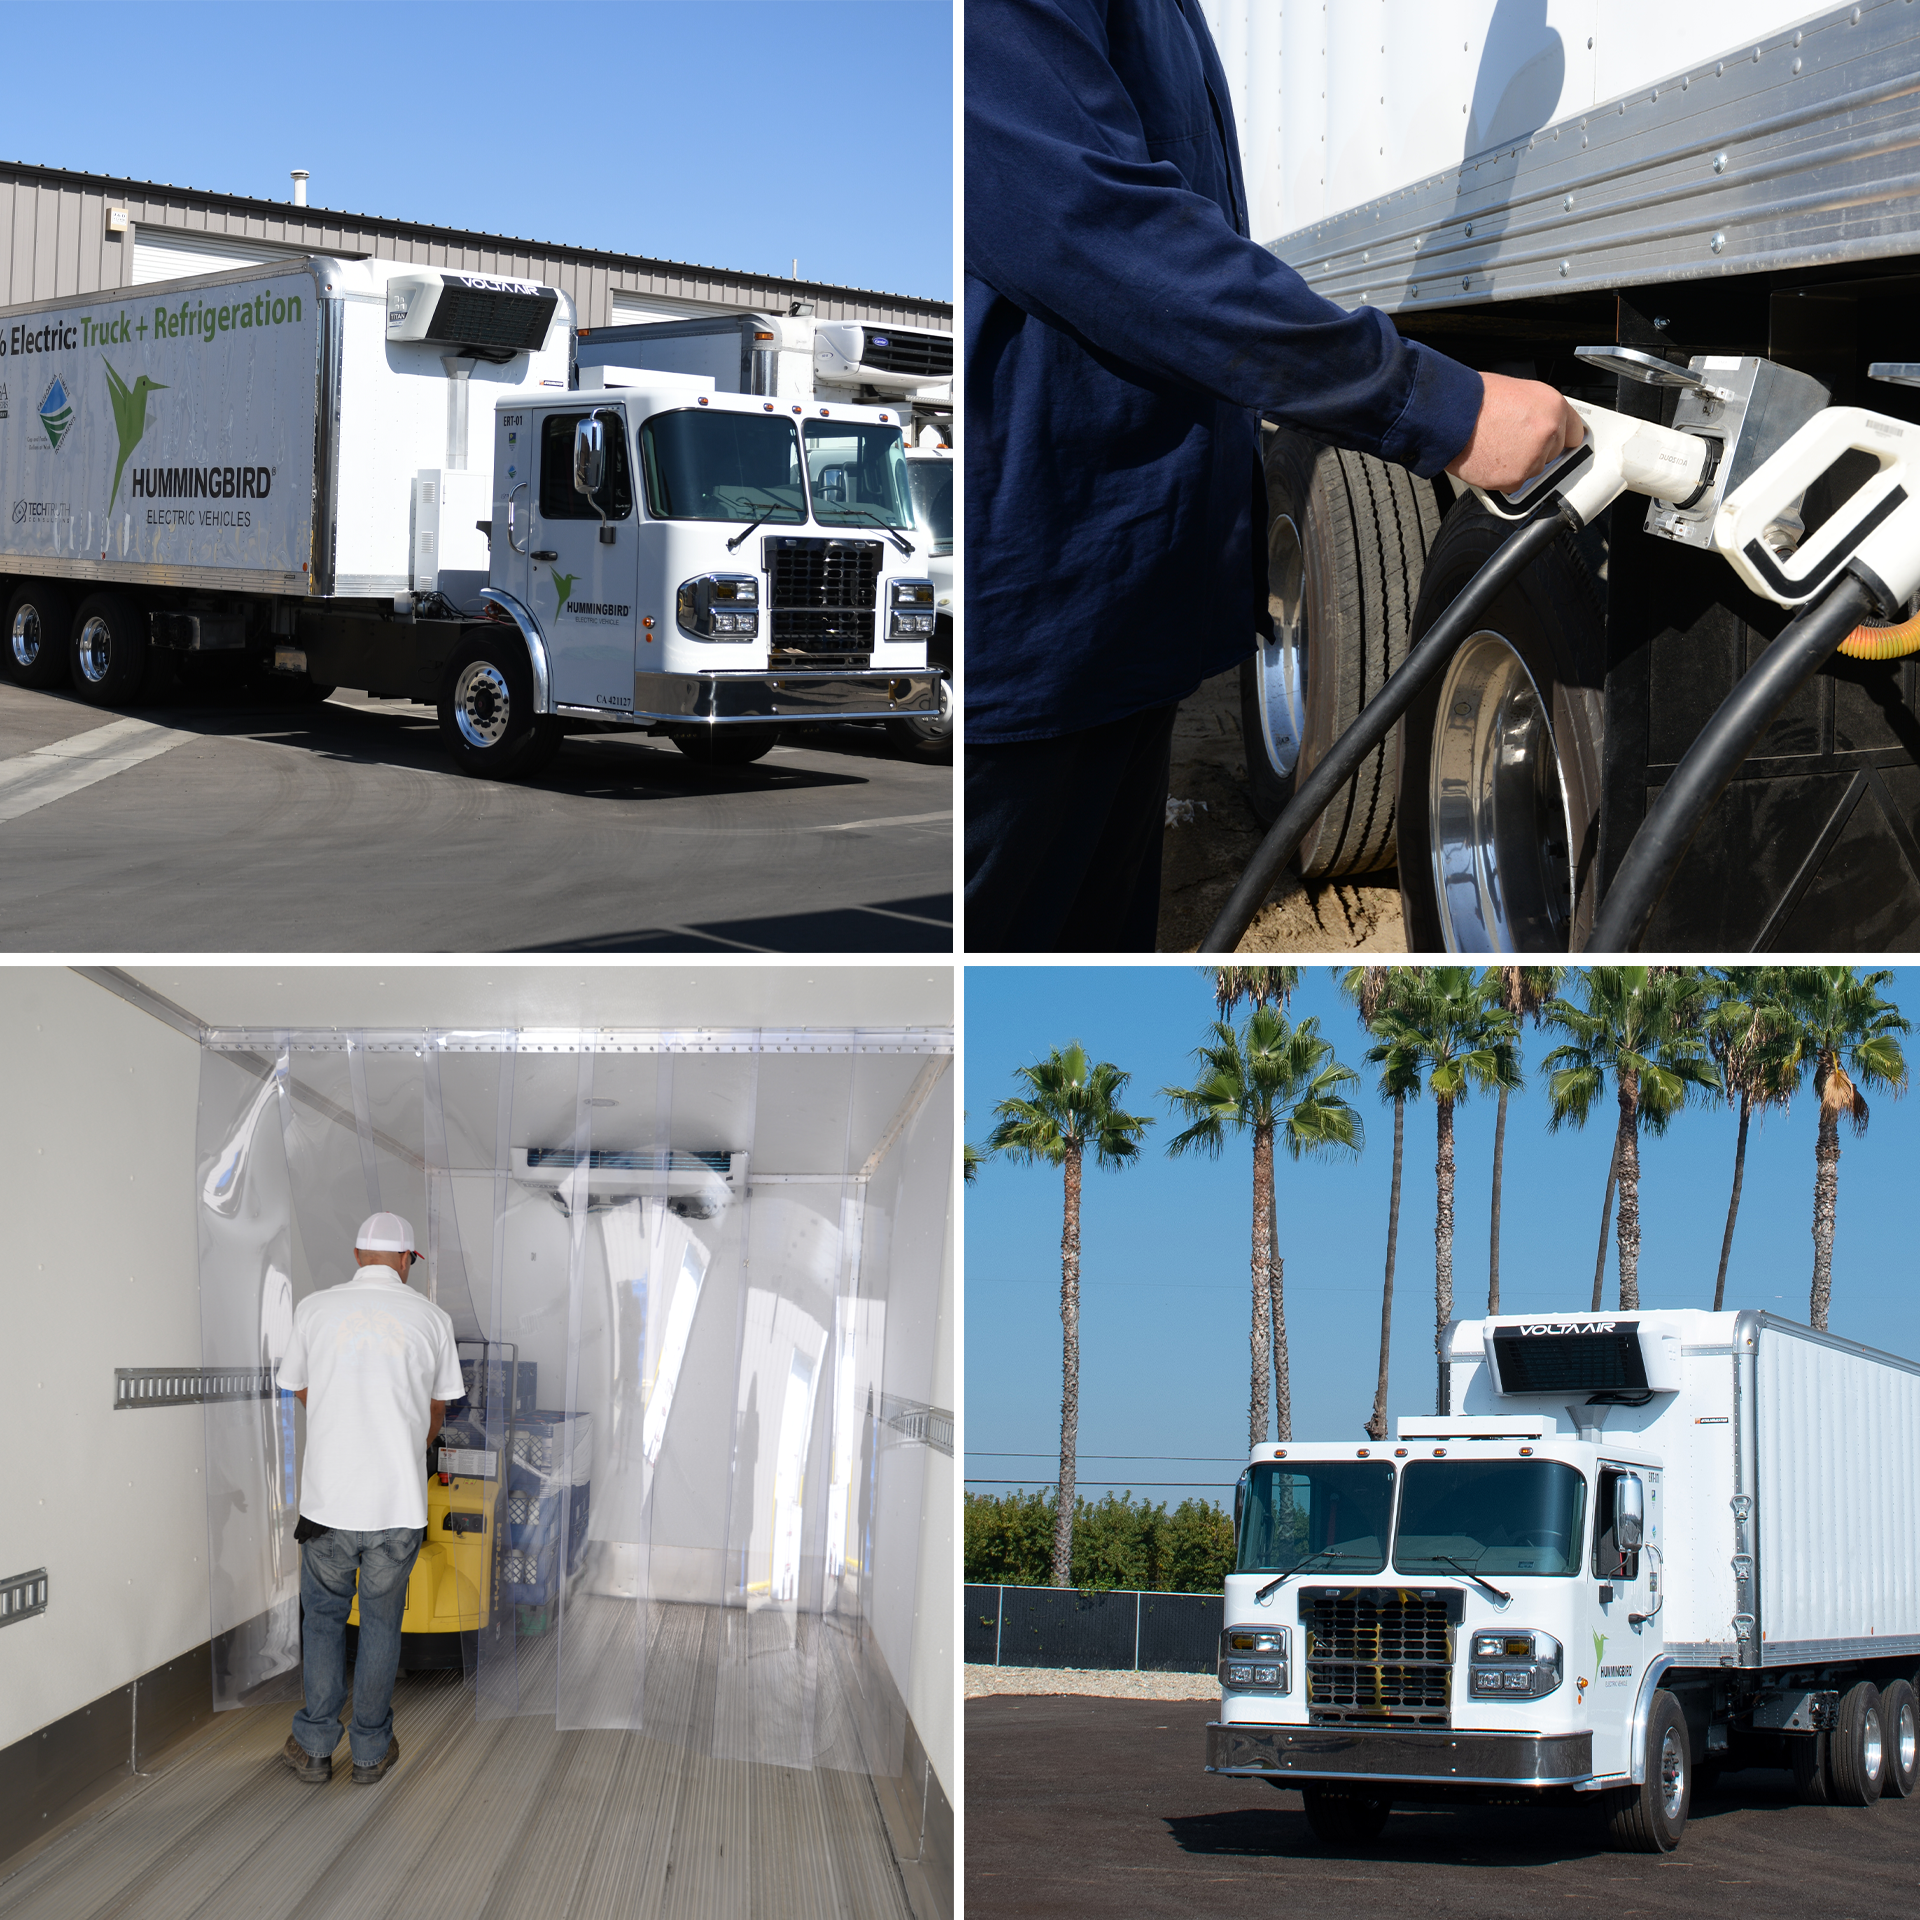 HummingbirdEV’s all-electric big rigs equipped with eTRUs being used in Ag industry showcasing net-zero emissions in Central Valley, California.